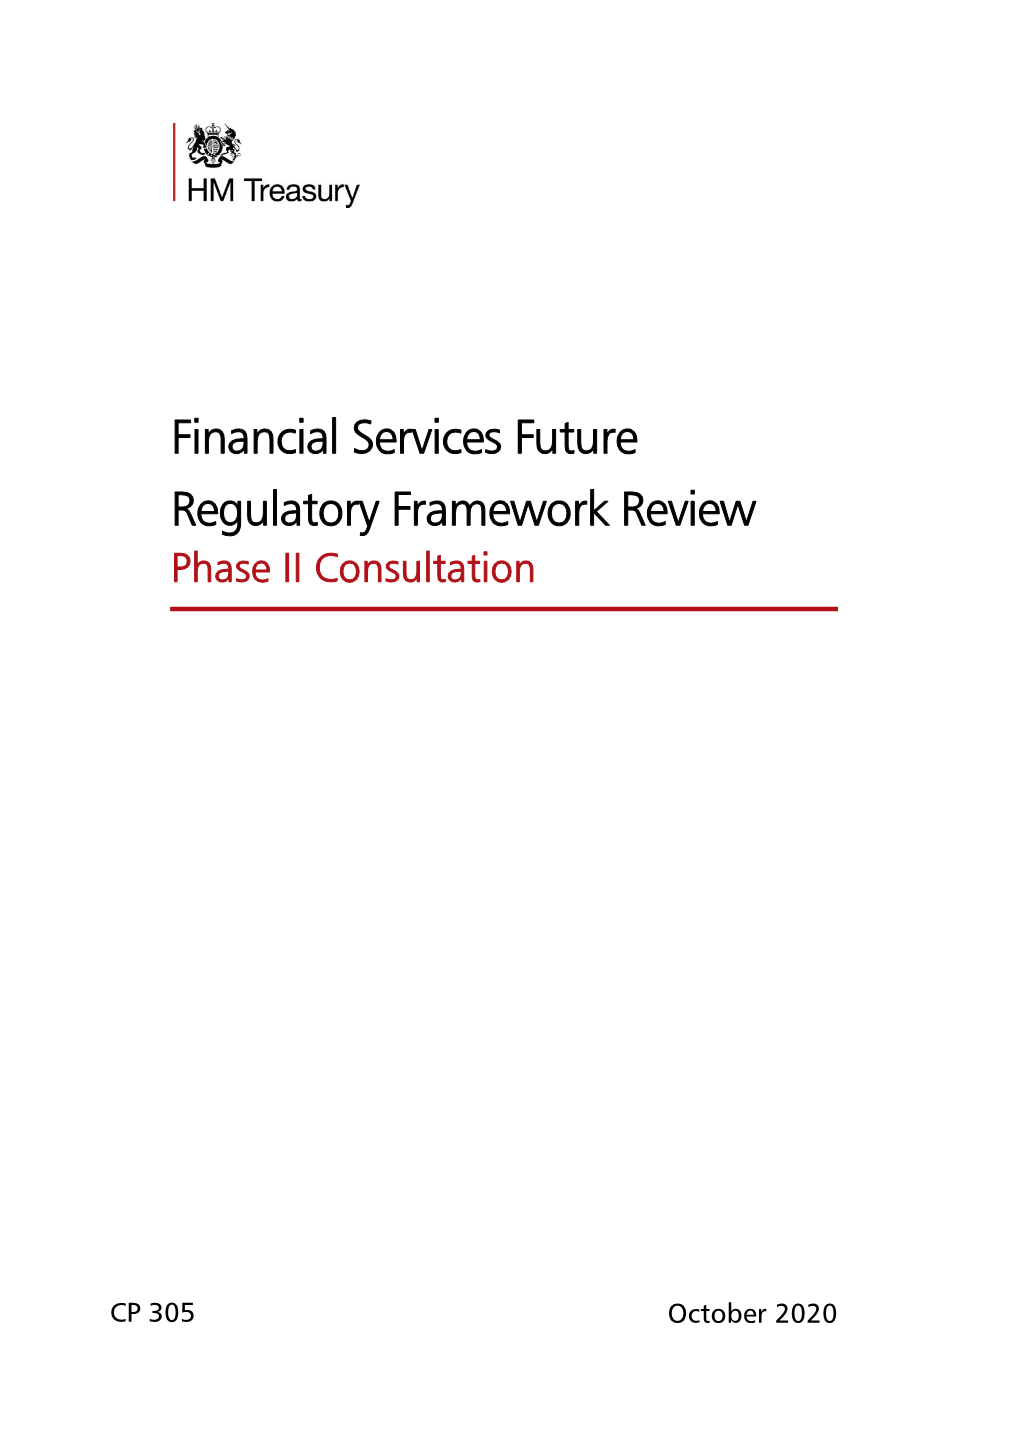 Financial Services Future Regulatory Framework Review Phase II Consultation